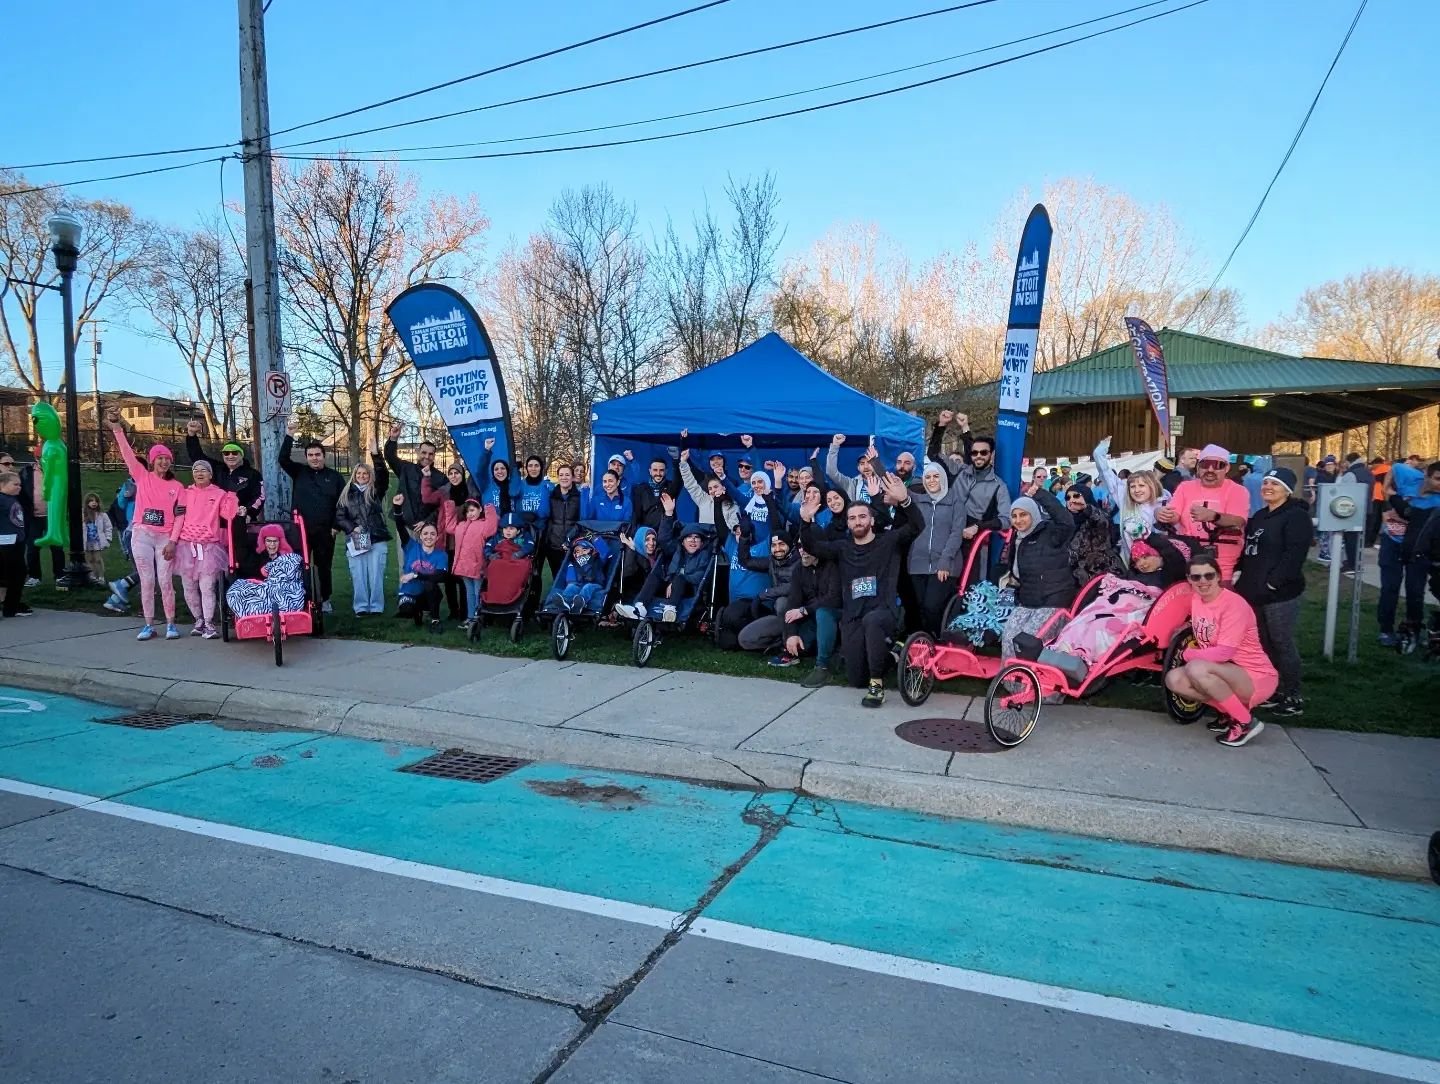 For the second year, we teamed up with @rf.events, @ainsleys_angels of SE Michigan, and @dbnschools_specialeducation to help make the Martian Races 5K more accessible to people of all abilities! Children and young adults hopped into specialty strolle